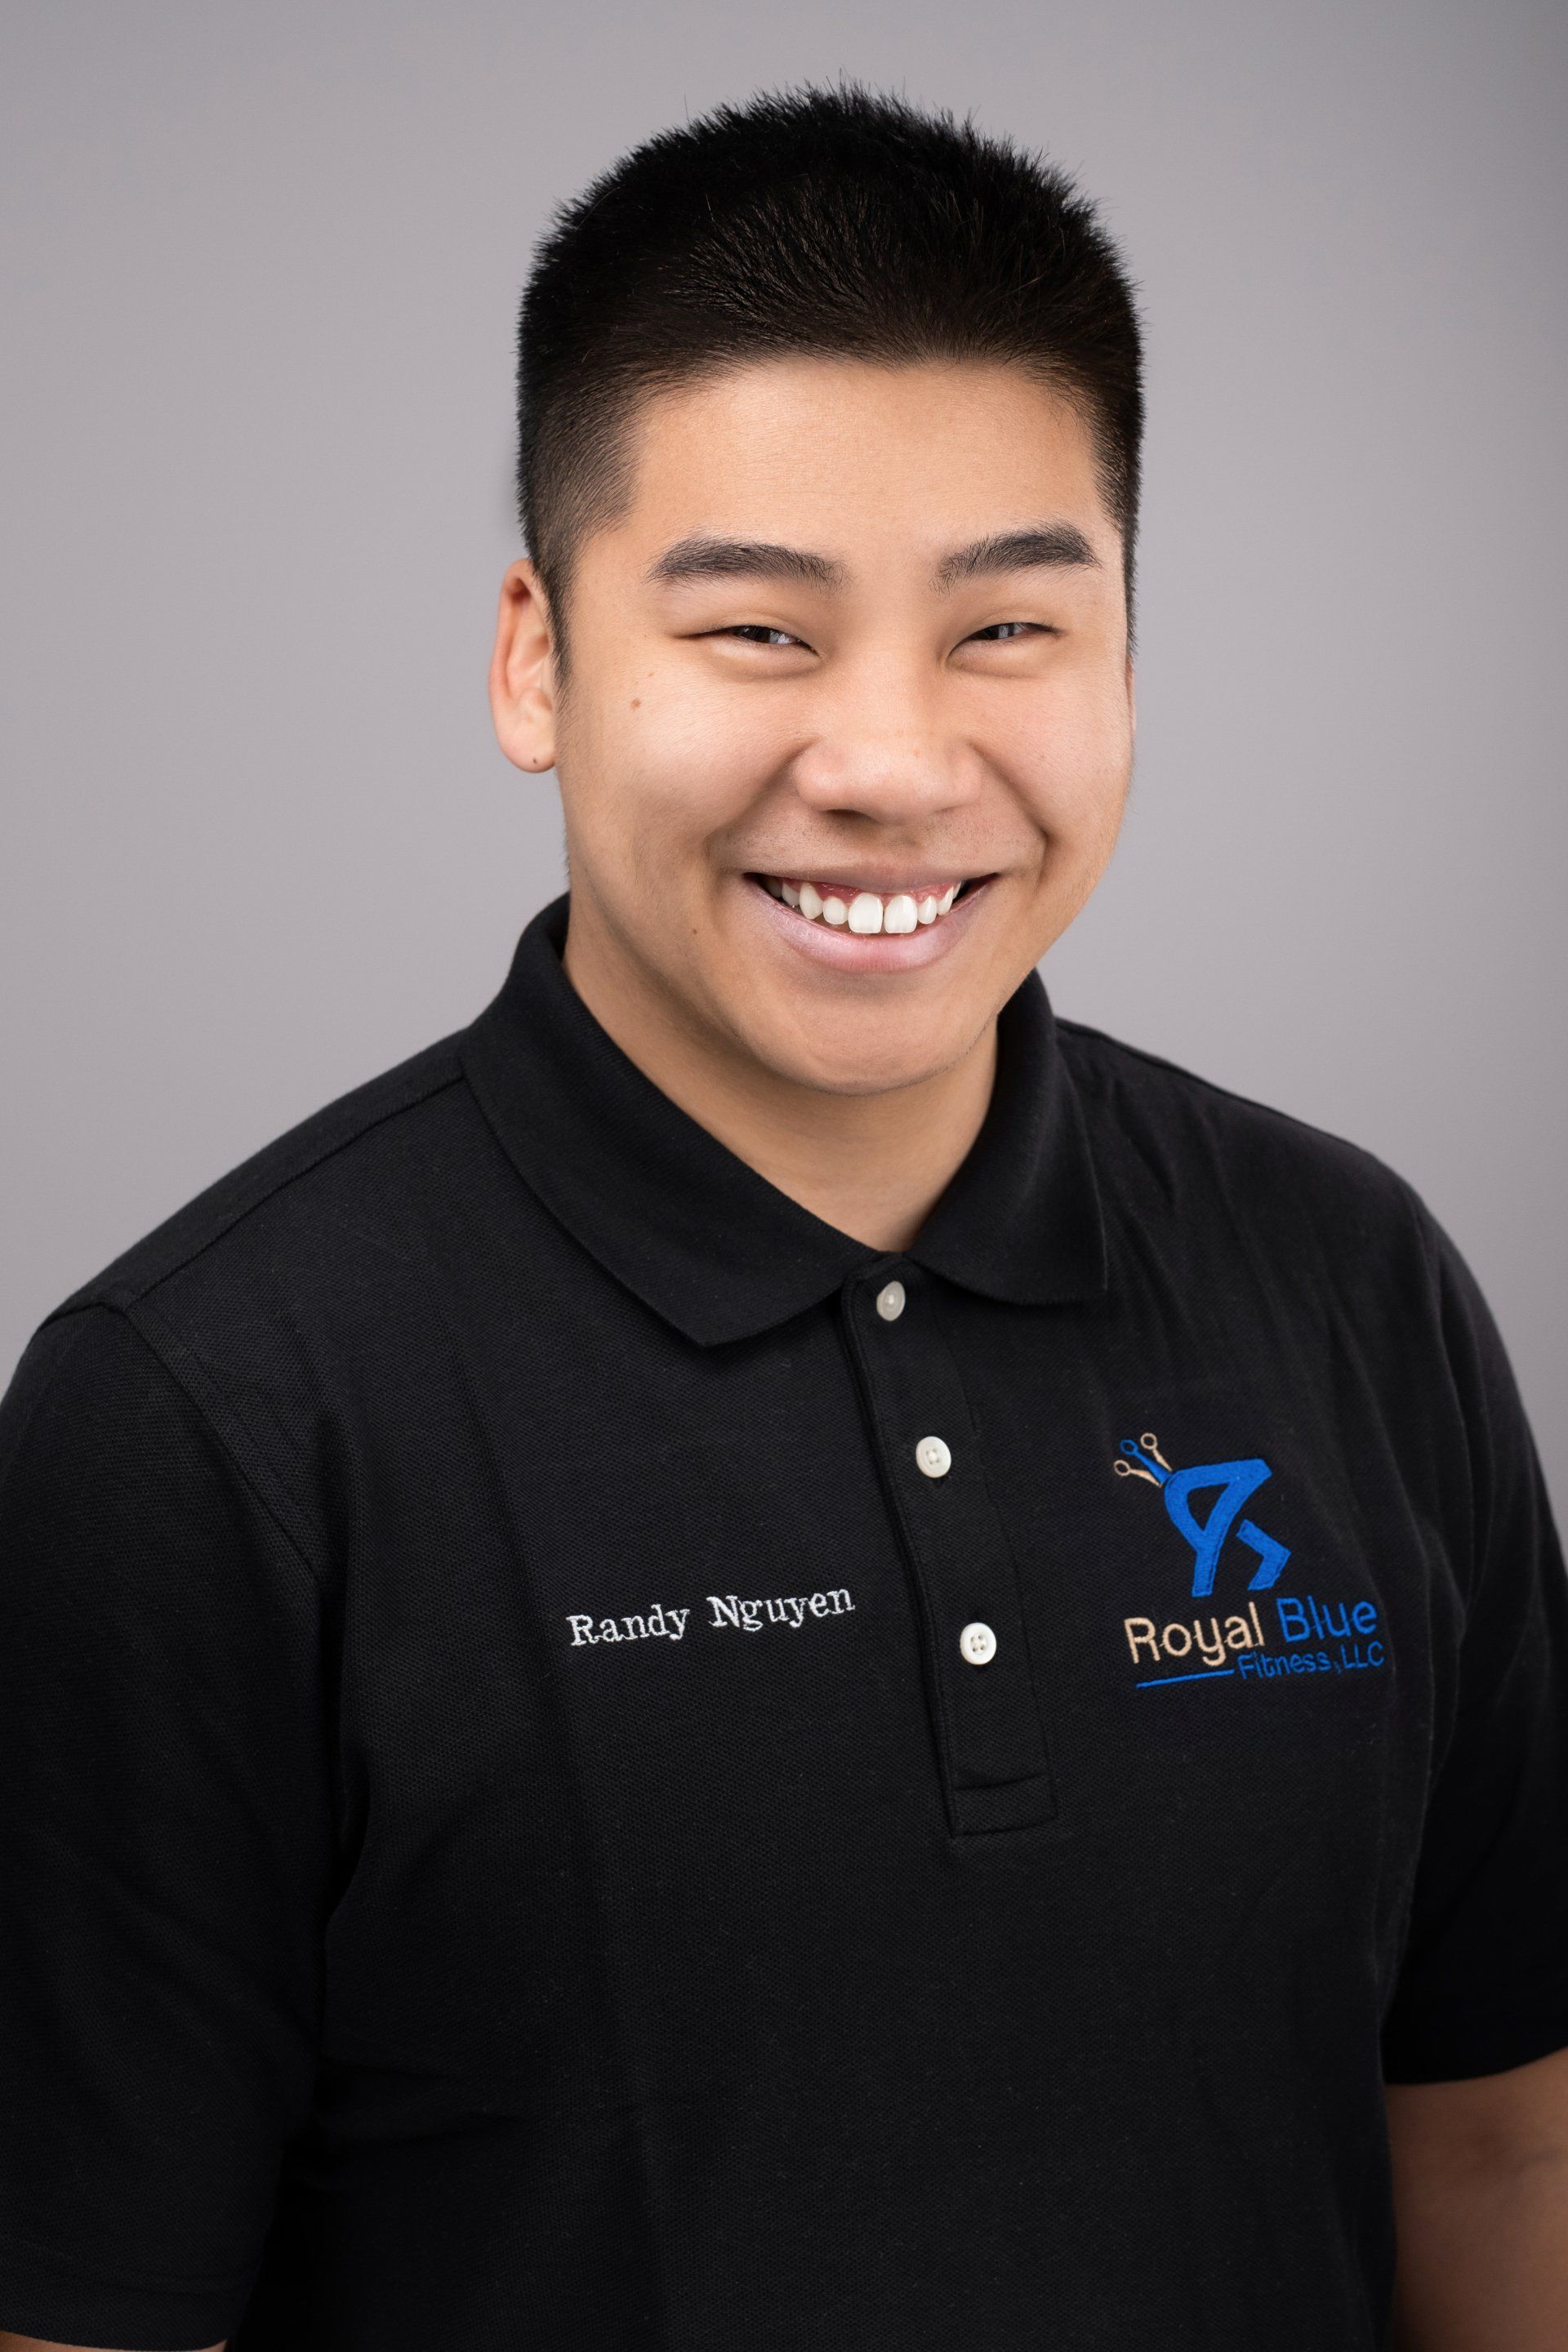 Portrait of Randy Nguyen in a black polo shirt with the Royal Blue Fitness logo, smiling confidently at the camera.